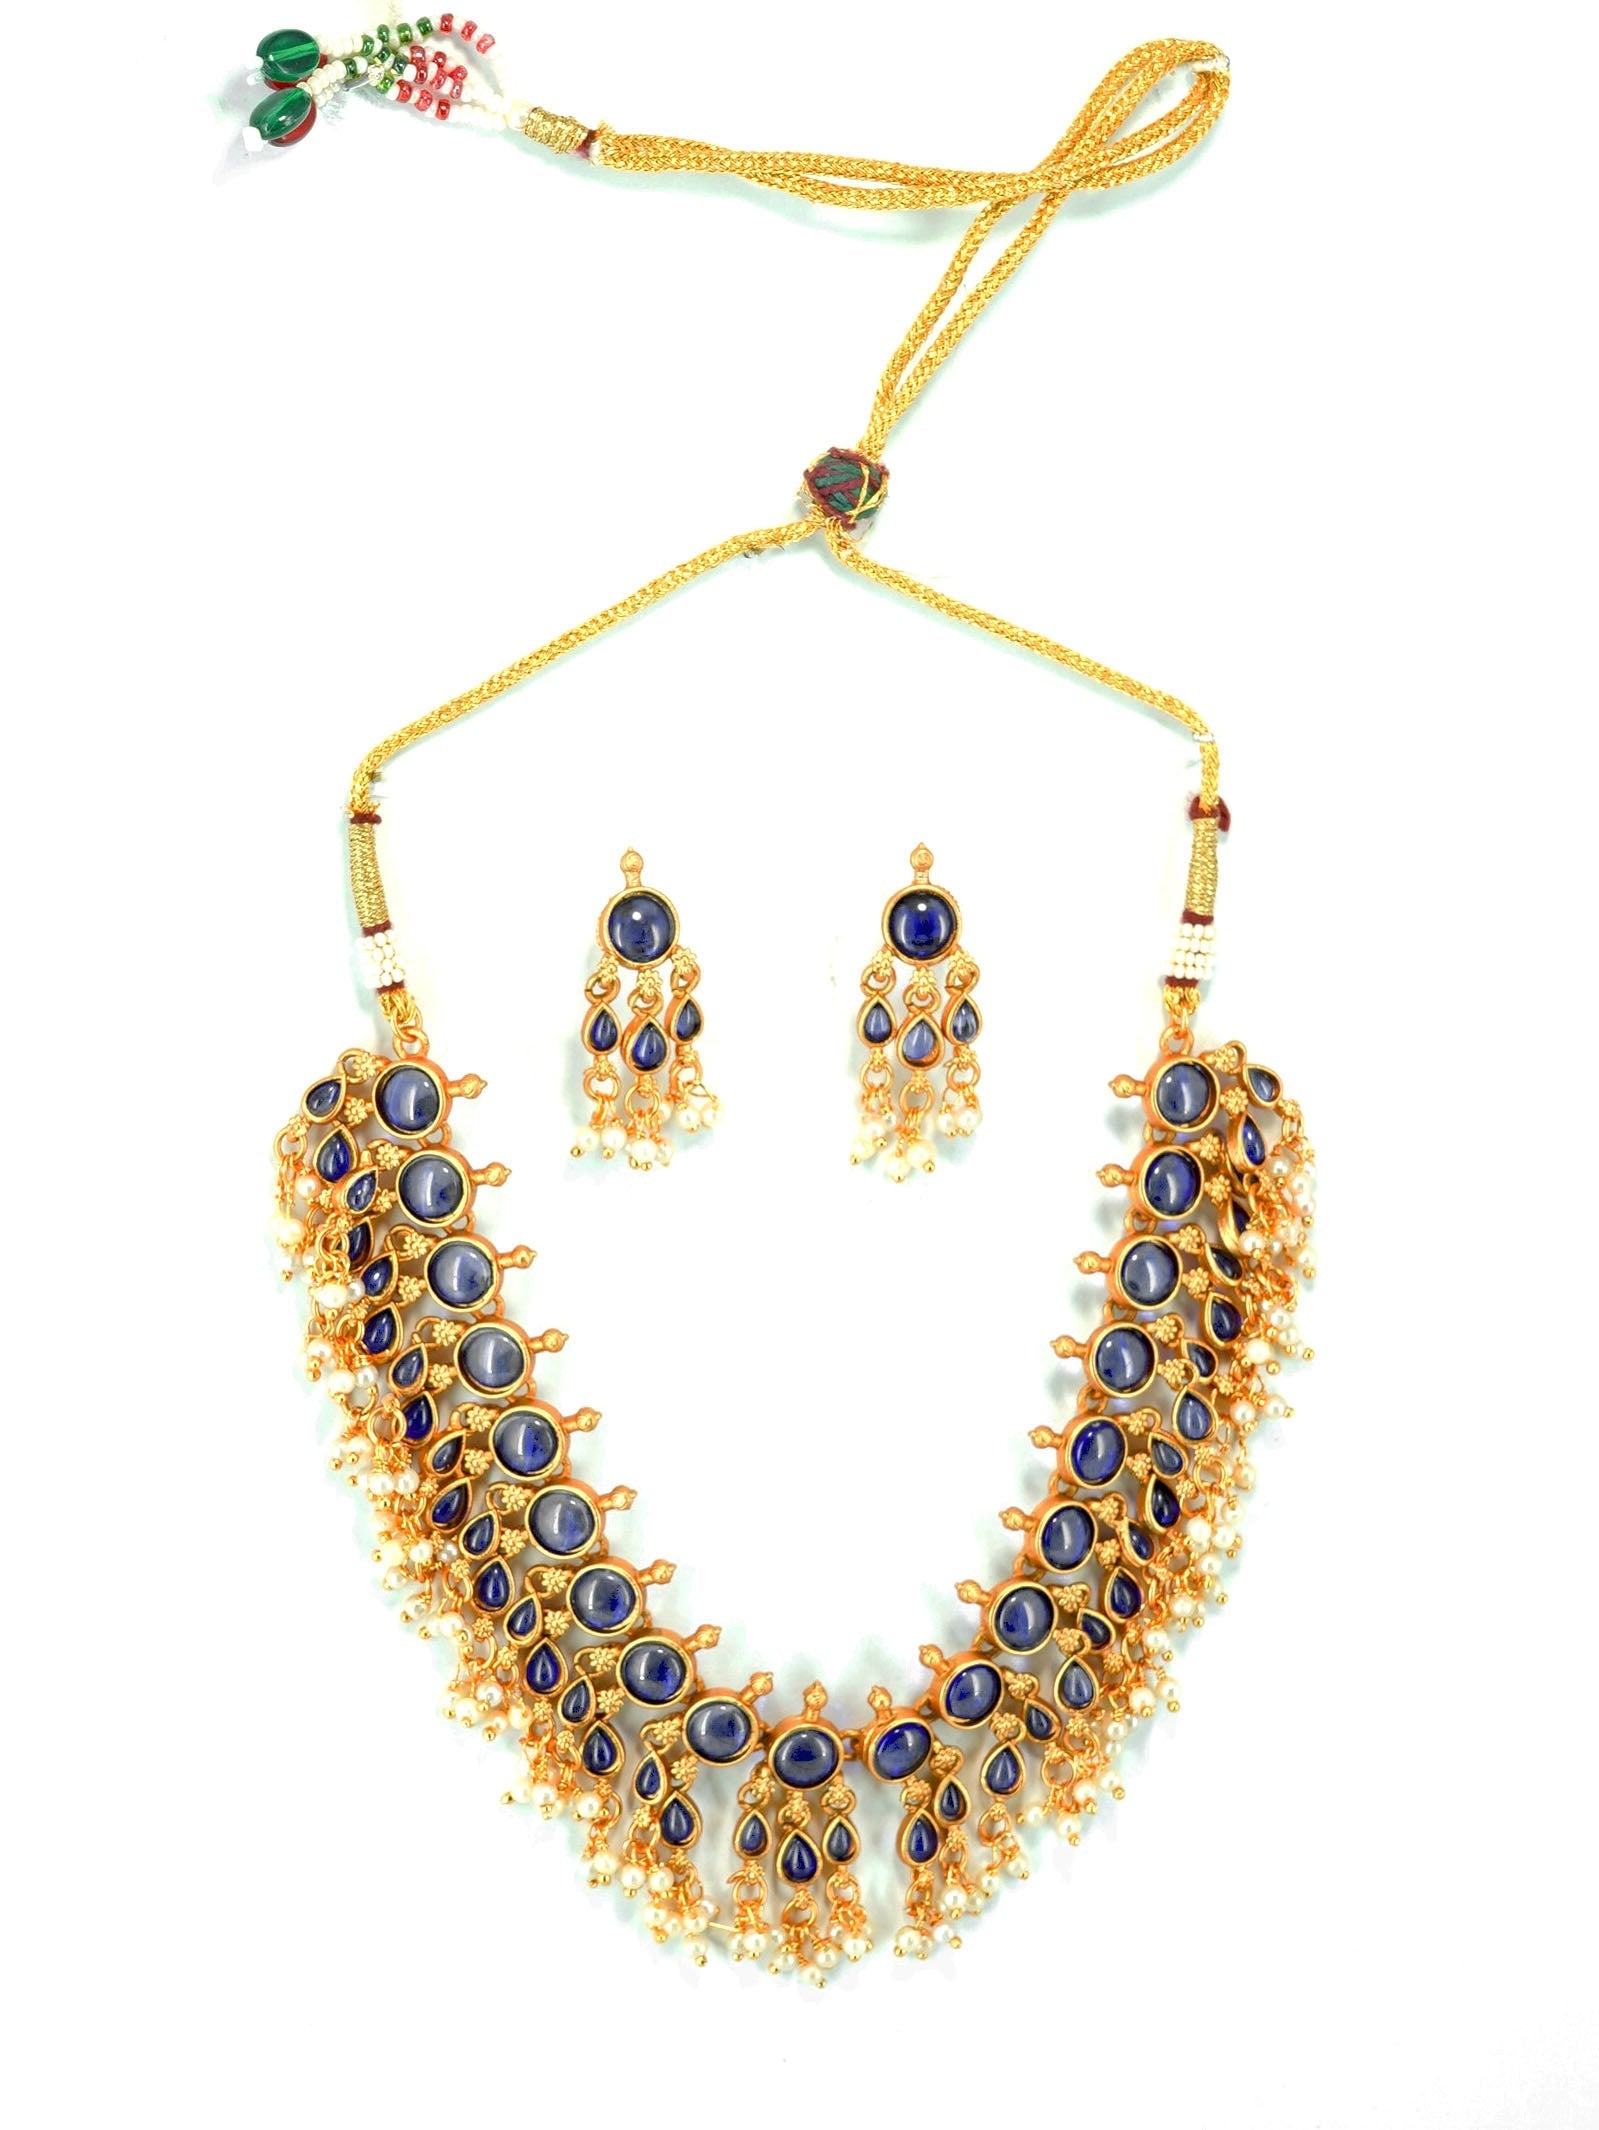 Gold Plated Pendant Necklace Set with White Pearls and Blue Bead -  Classiques - 4250445